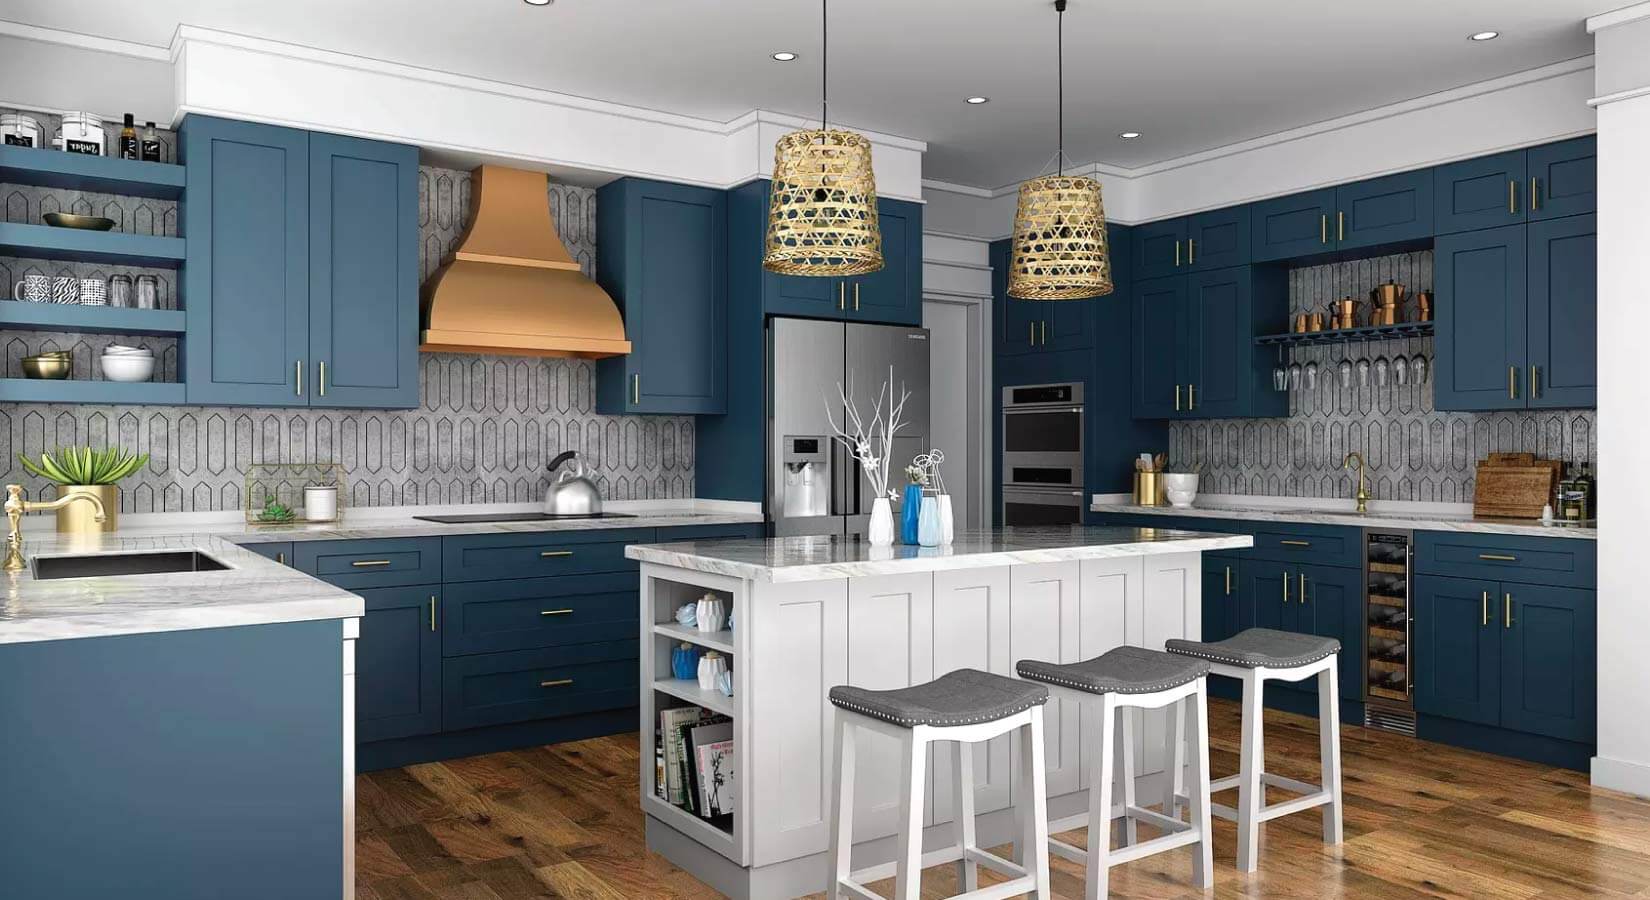 Dark blue kitchen cabinets with marble countertop and copper range hood.